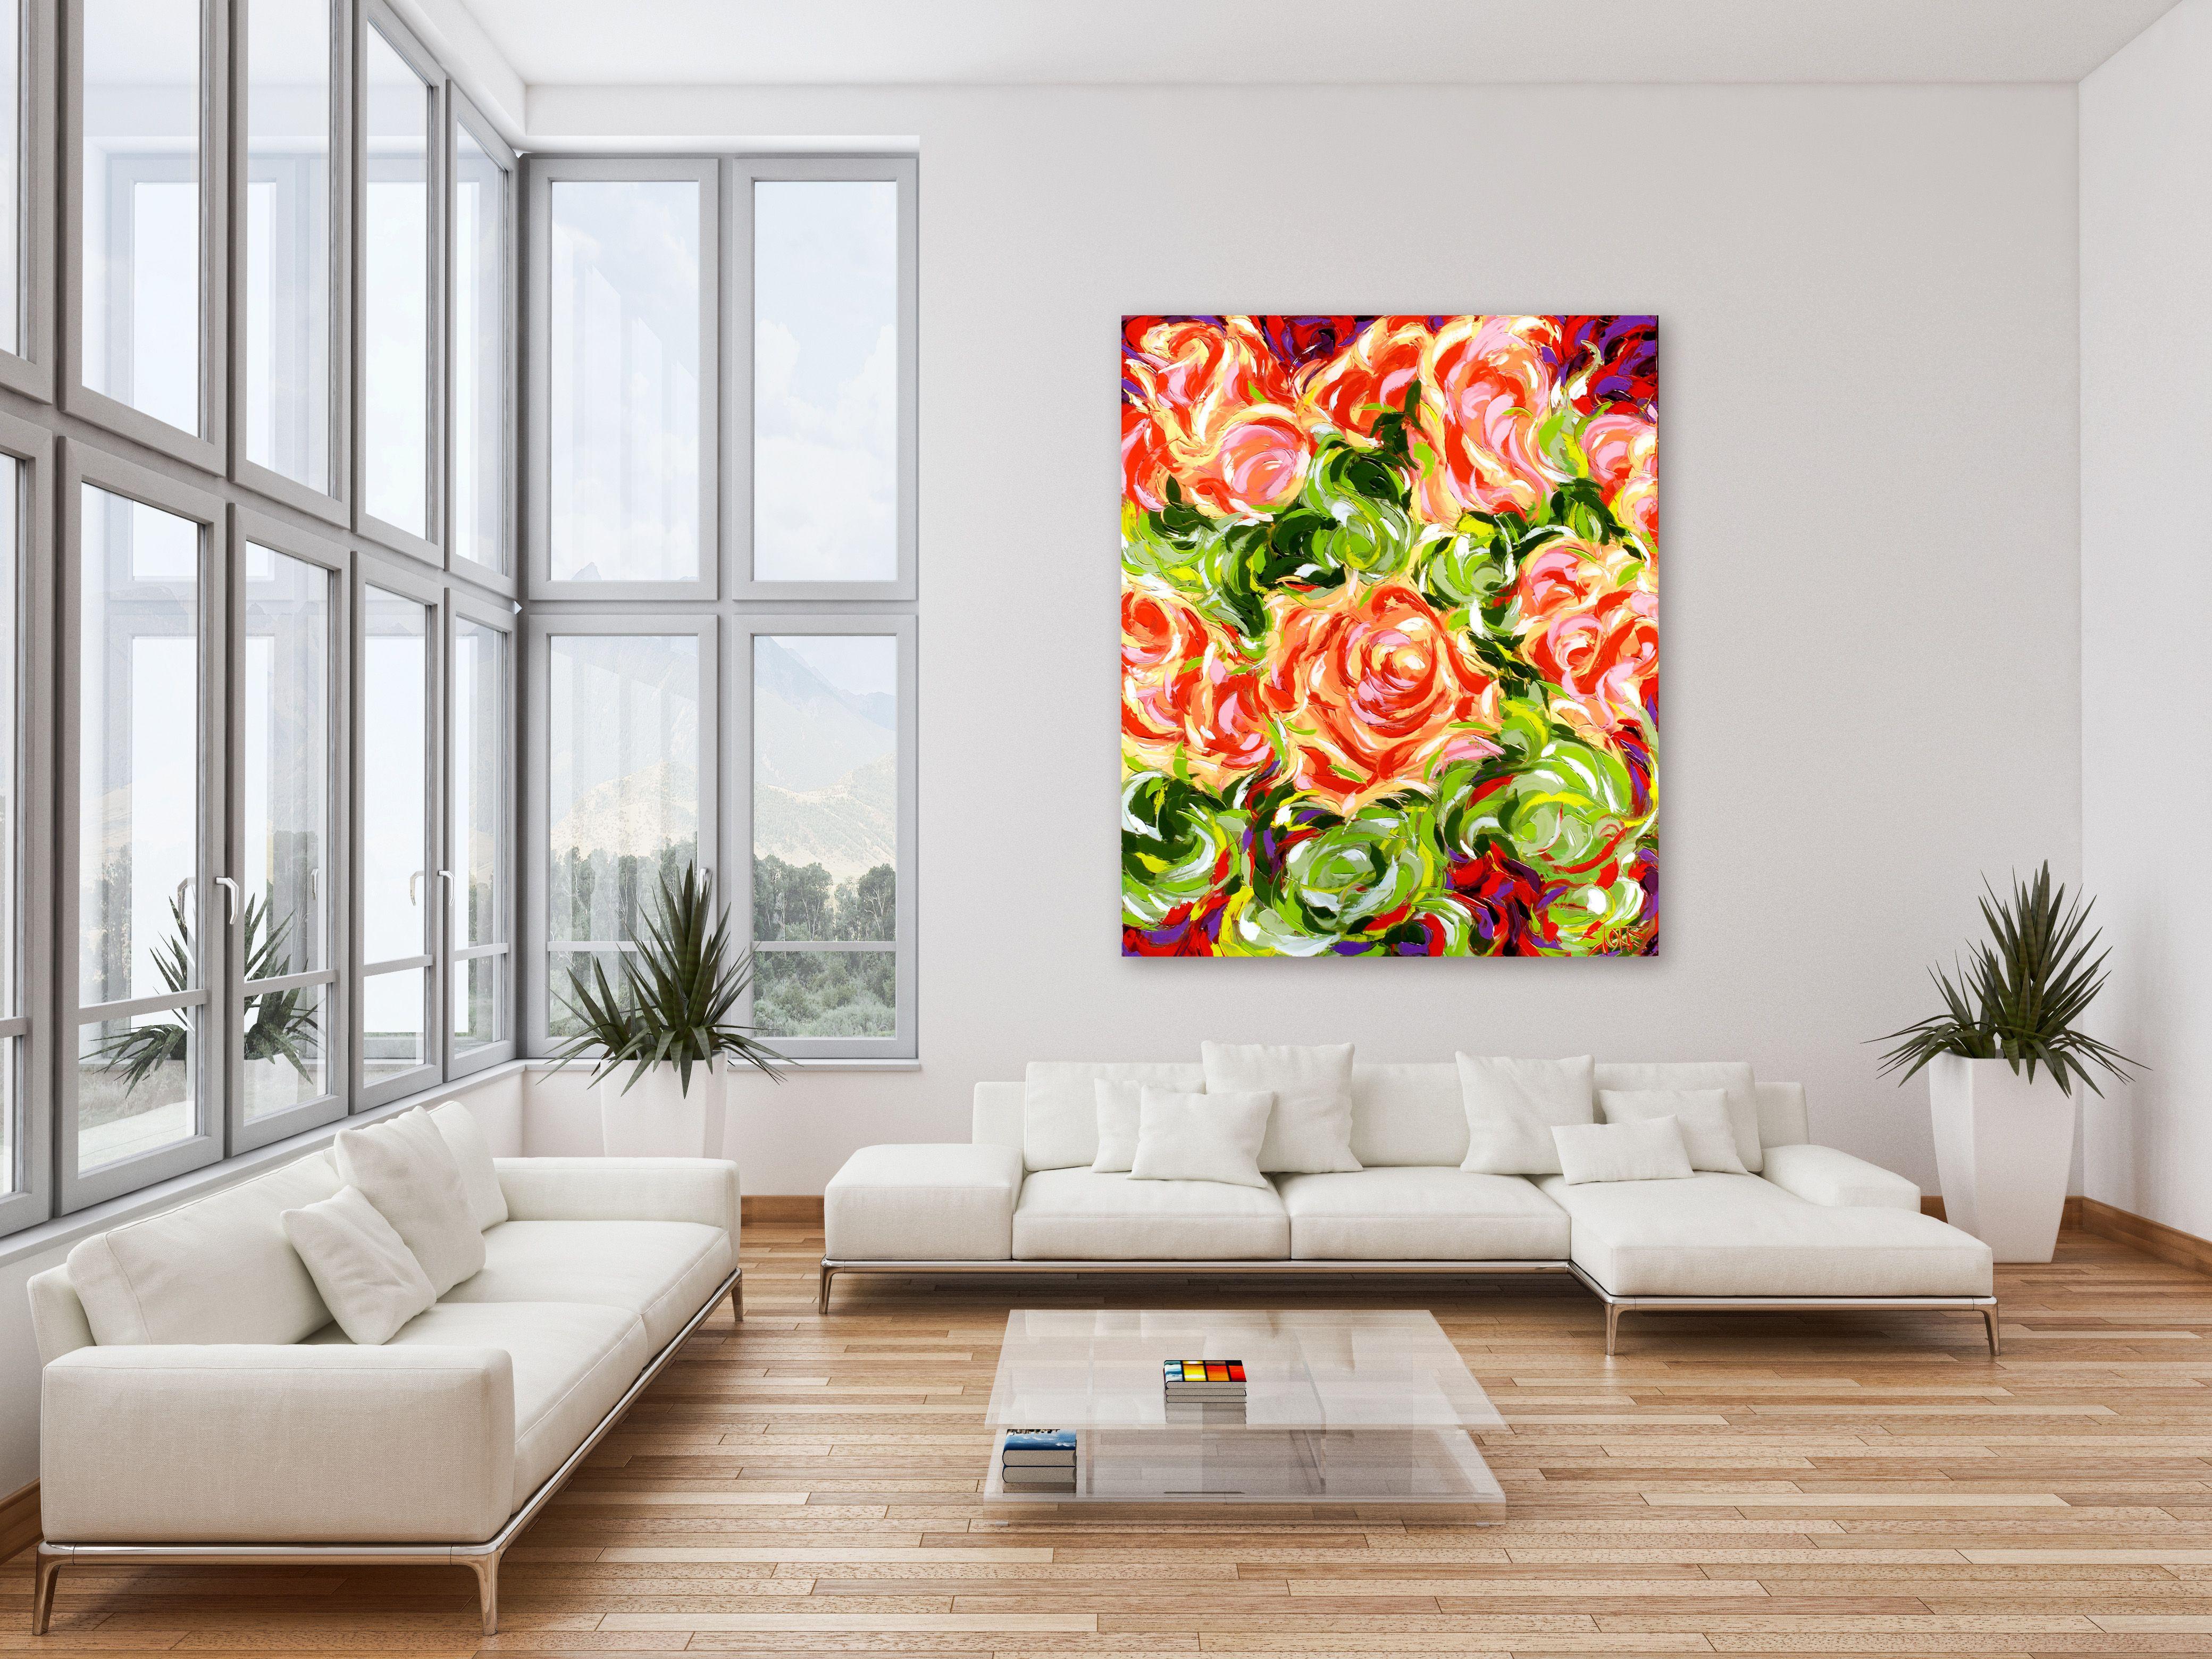 The rose petals swirl and spiral and dance in the breeze. :: Painting :: Abstract Expressionism :: This piece comes with an official certificate of authenticity signed by the artist :: Ready to Hang: Yes :: Signed: Yes :: Signature Location: bottom